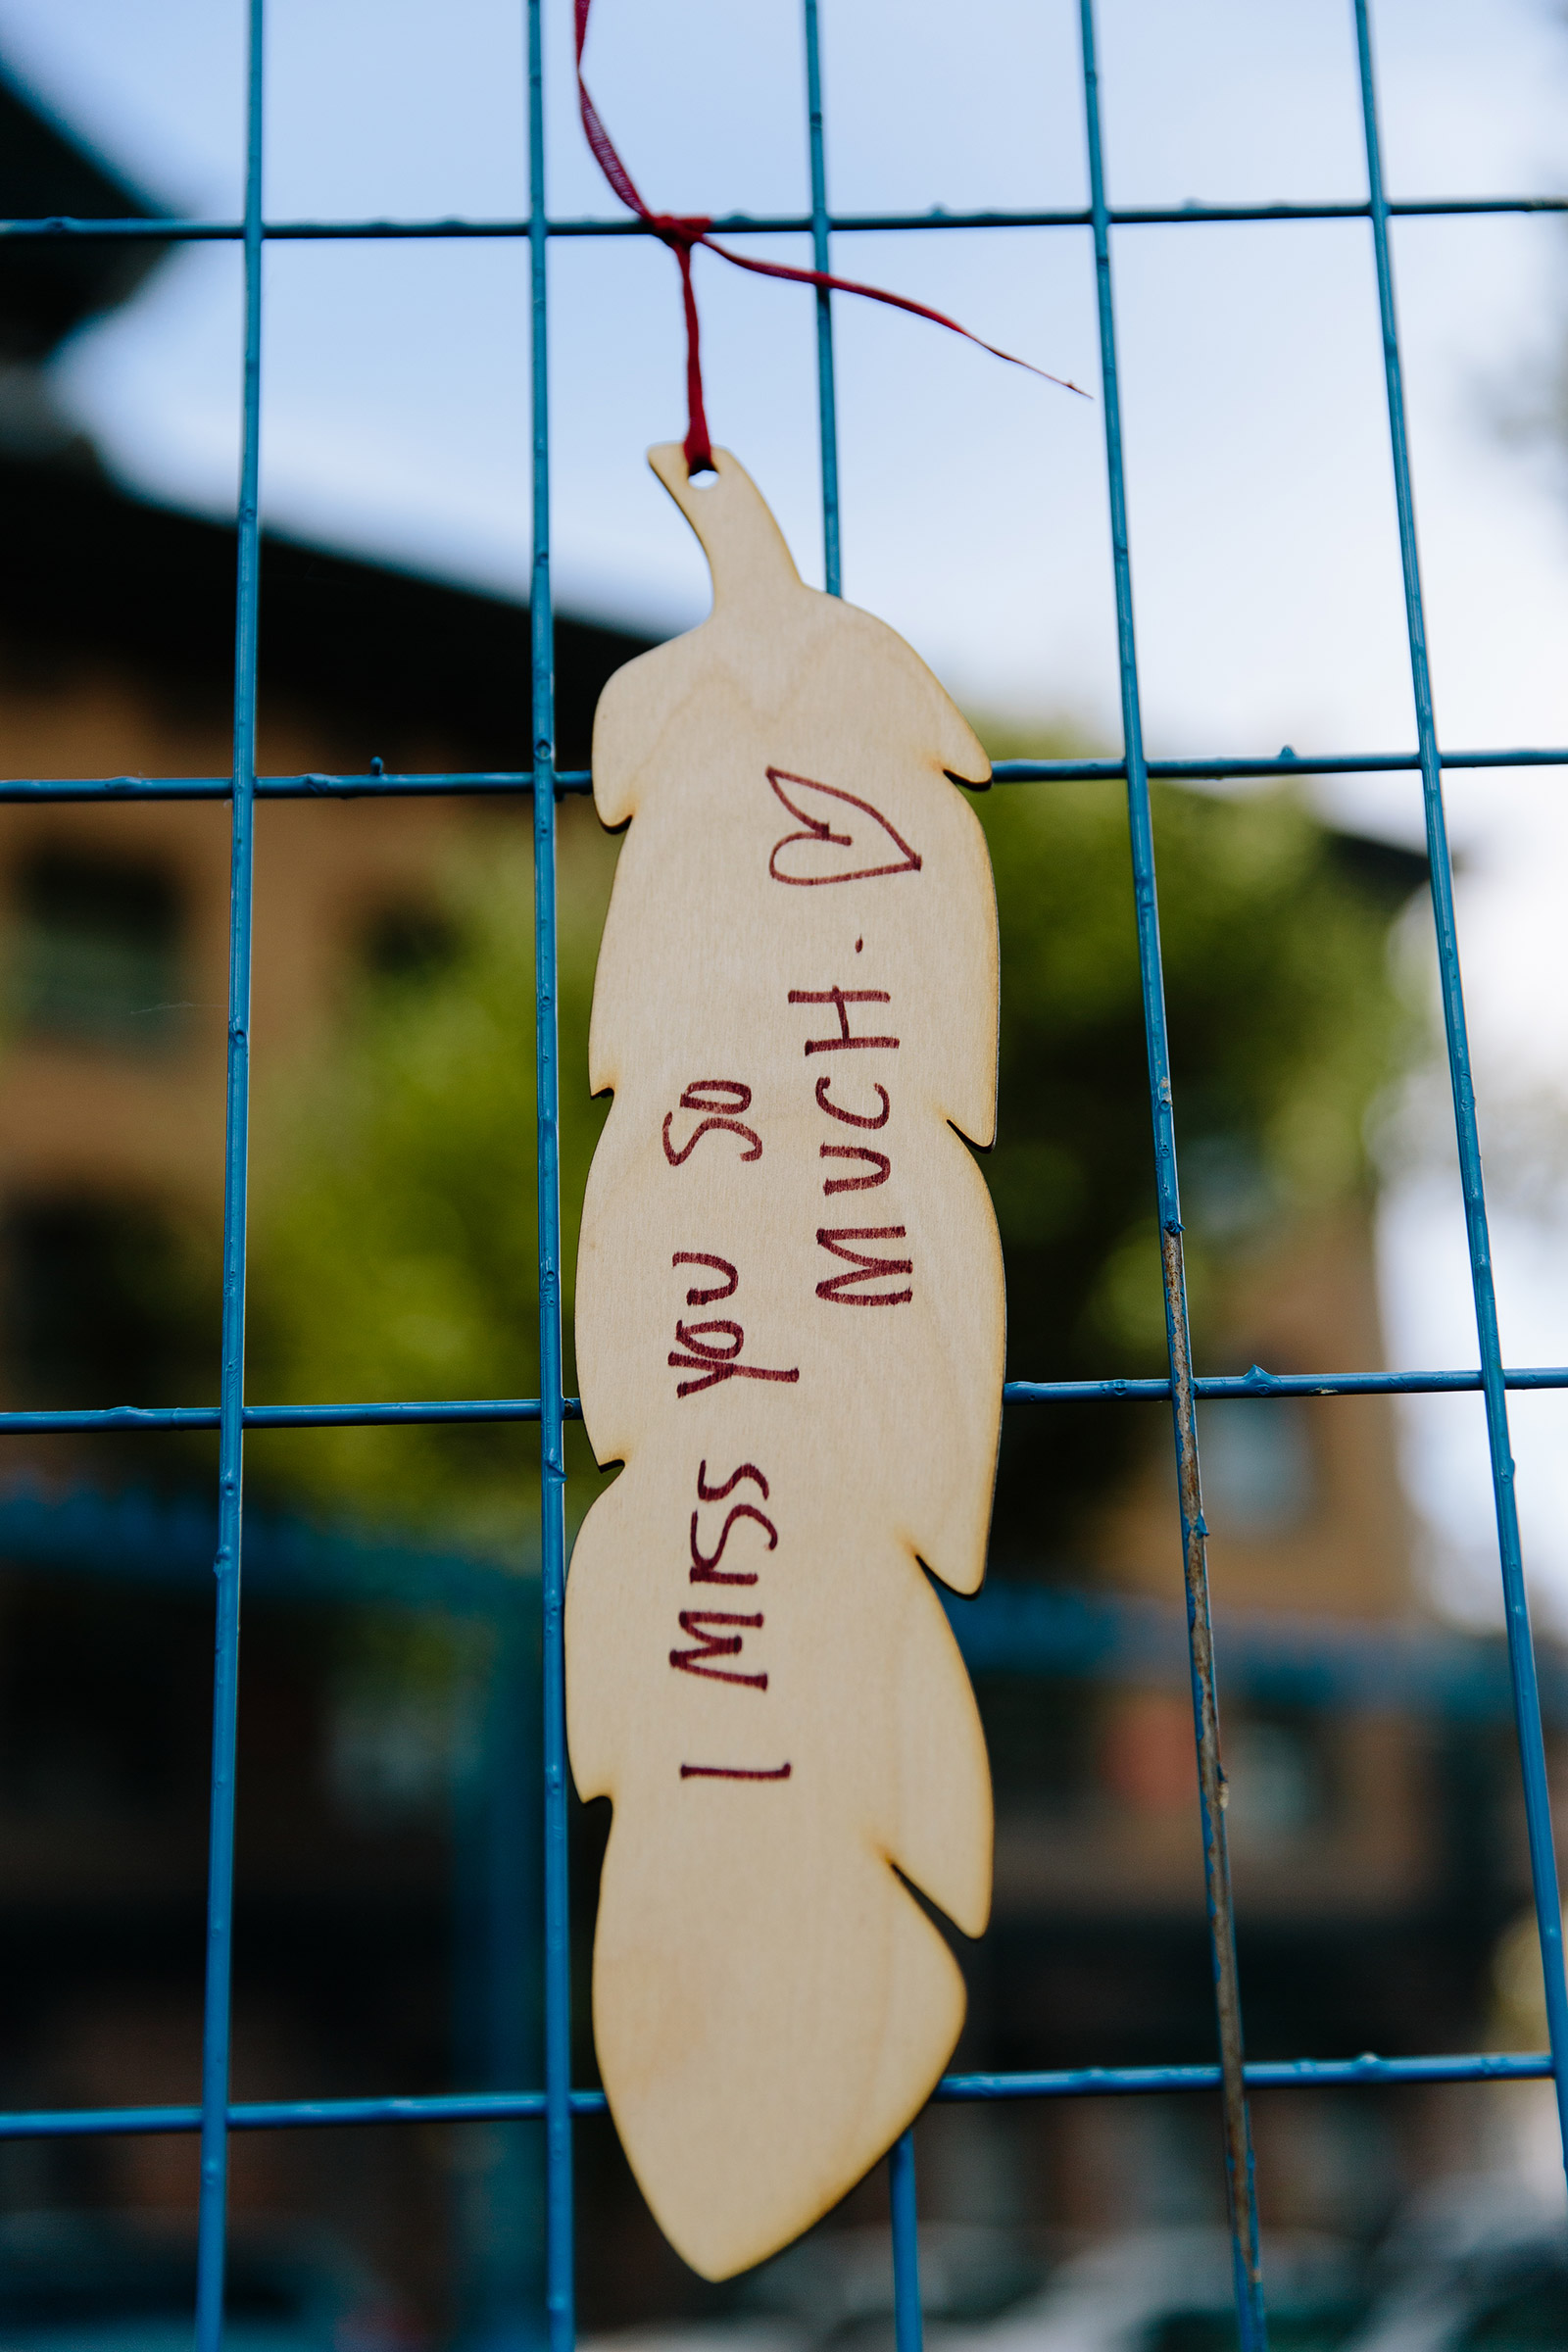 Wooden feathers that have the names of people who have died from toxic drug supply hang from a fence around Oppenheimer Park in Vancouver, B.C. August 31, 2021. Jackie Dives